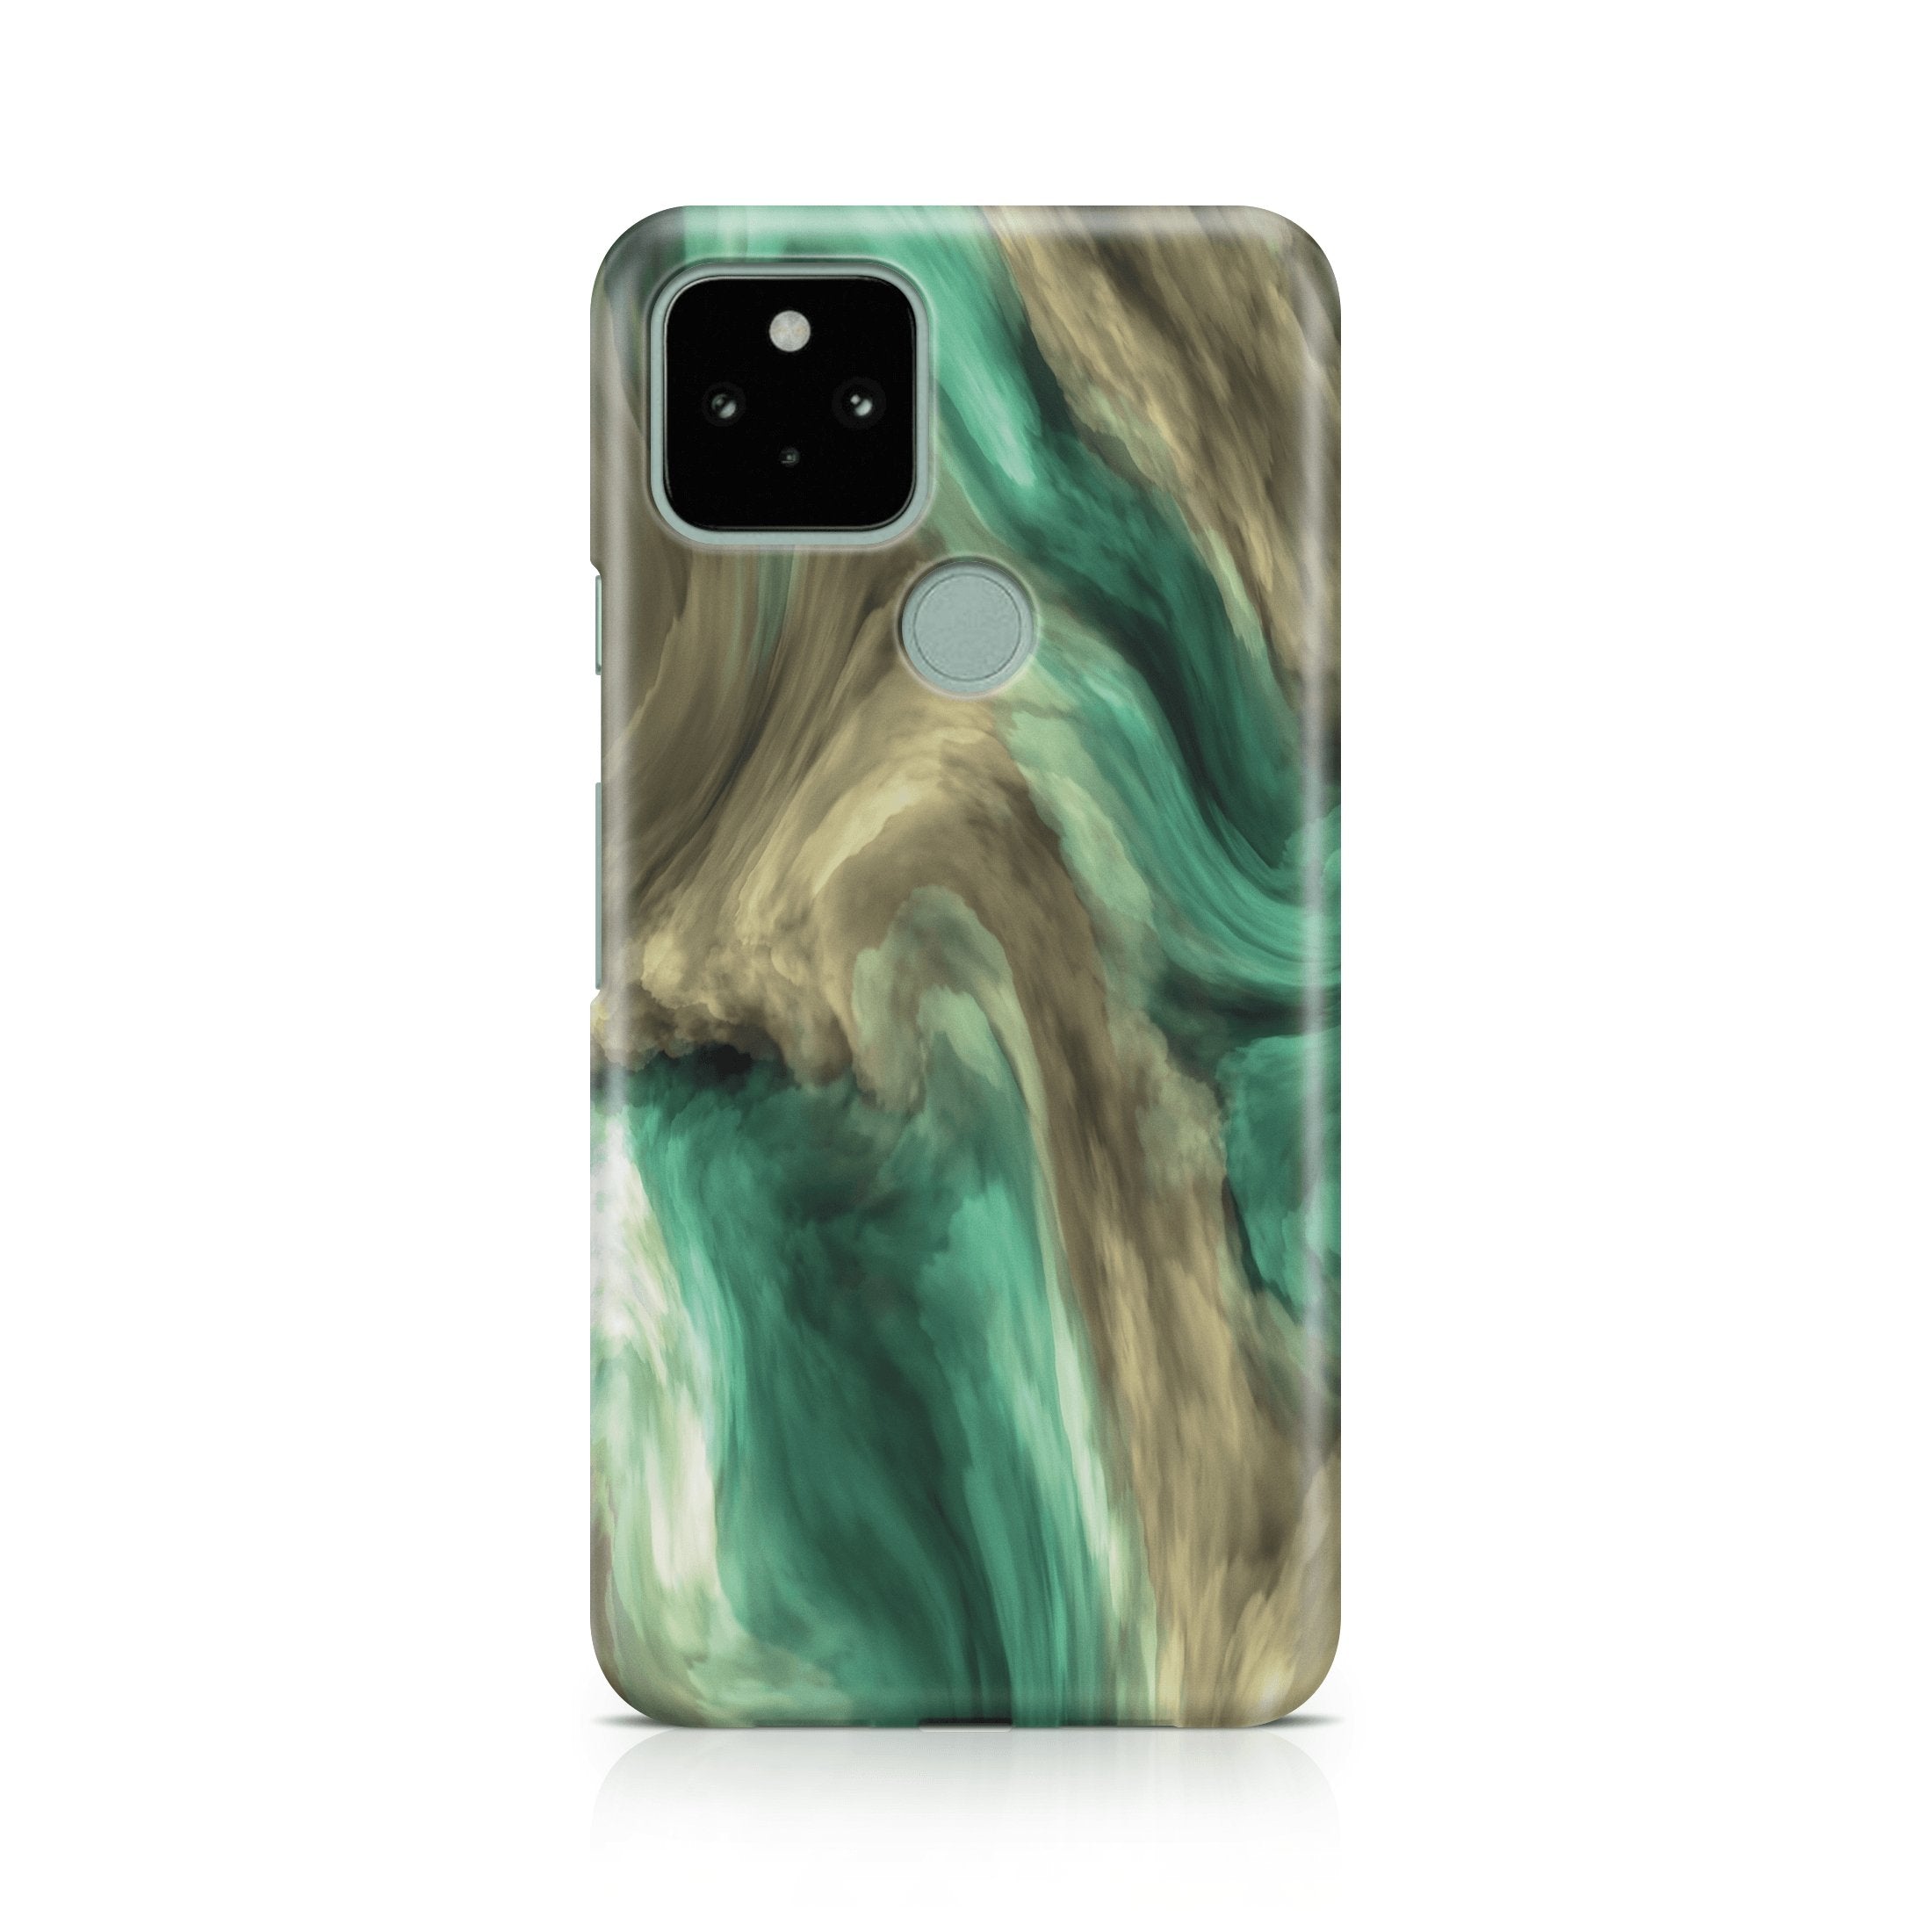 Chartreuse Blend - Google phone case designs by CaseSwagger